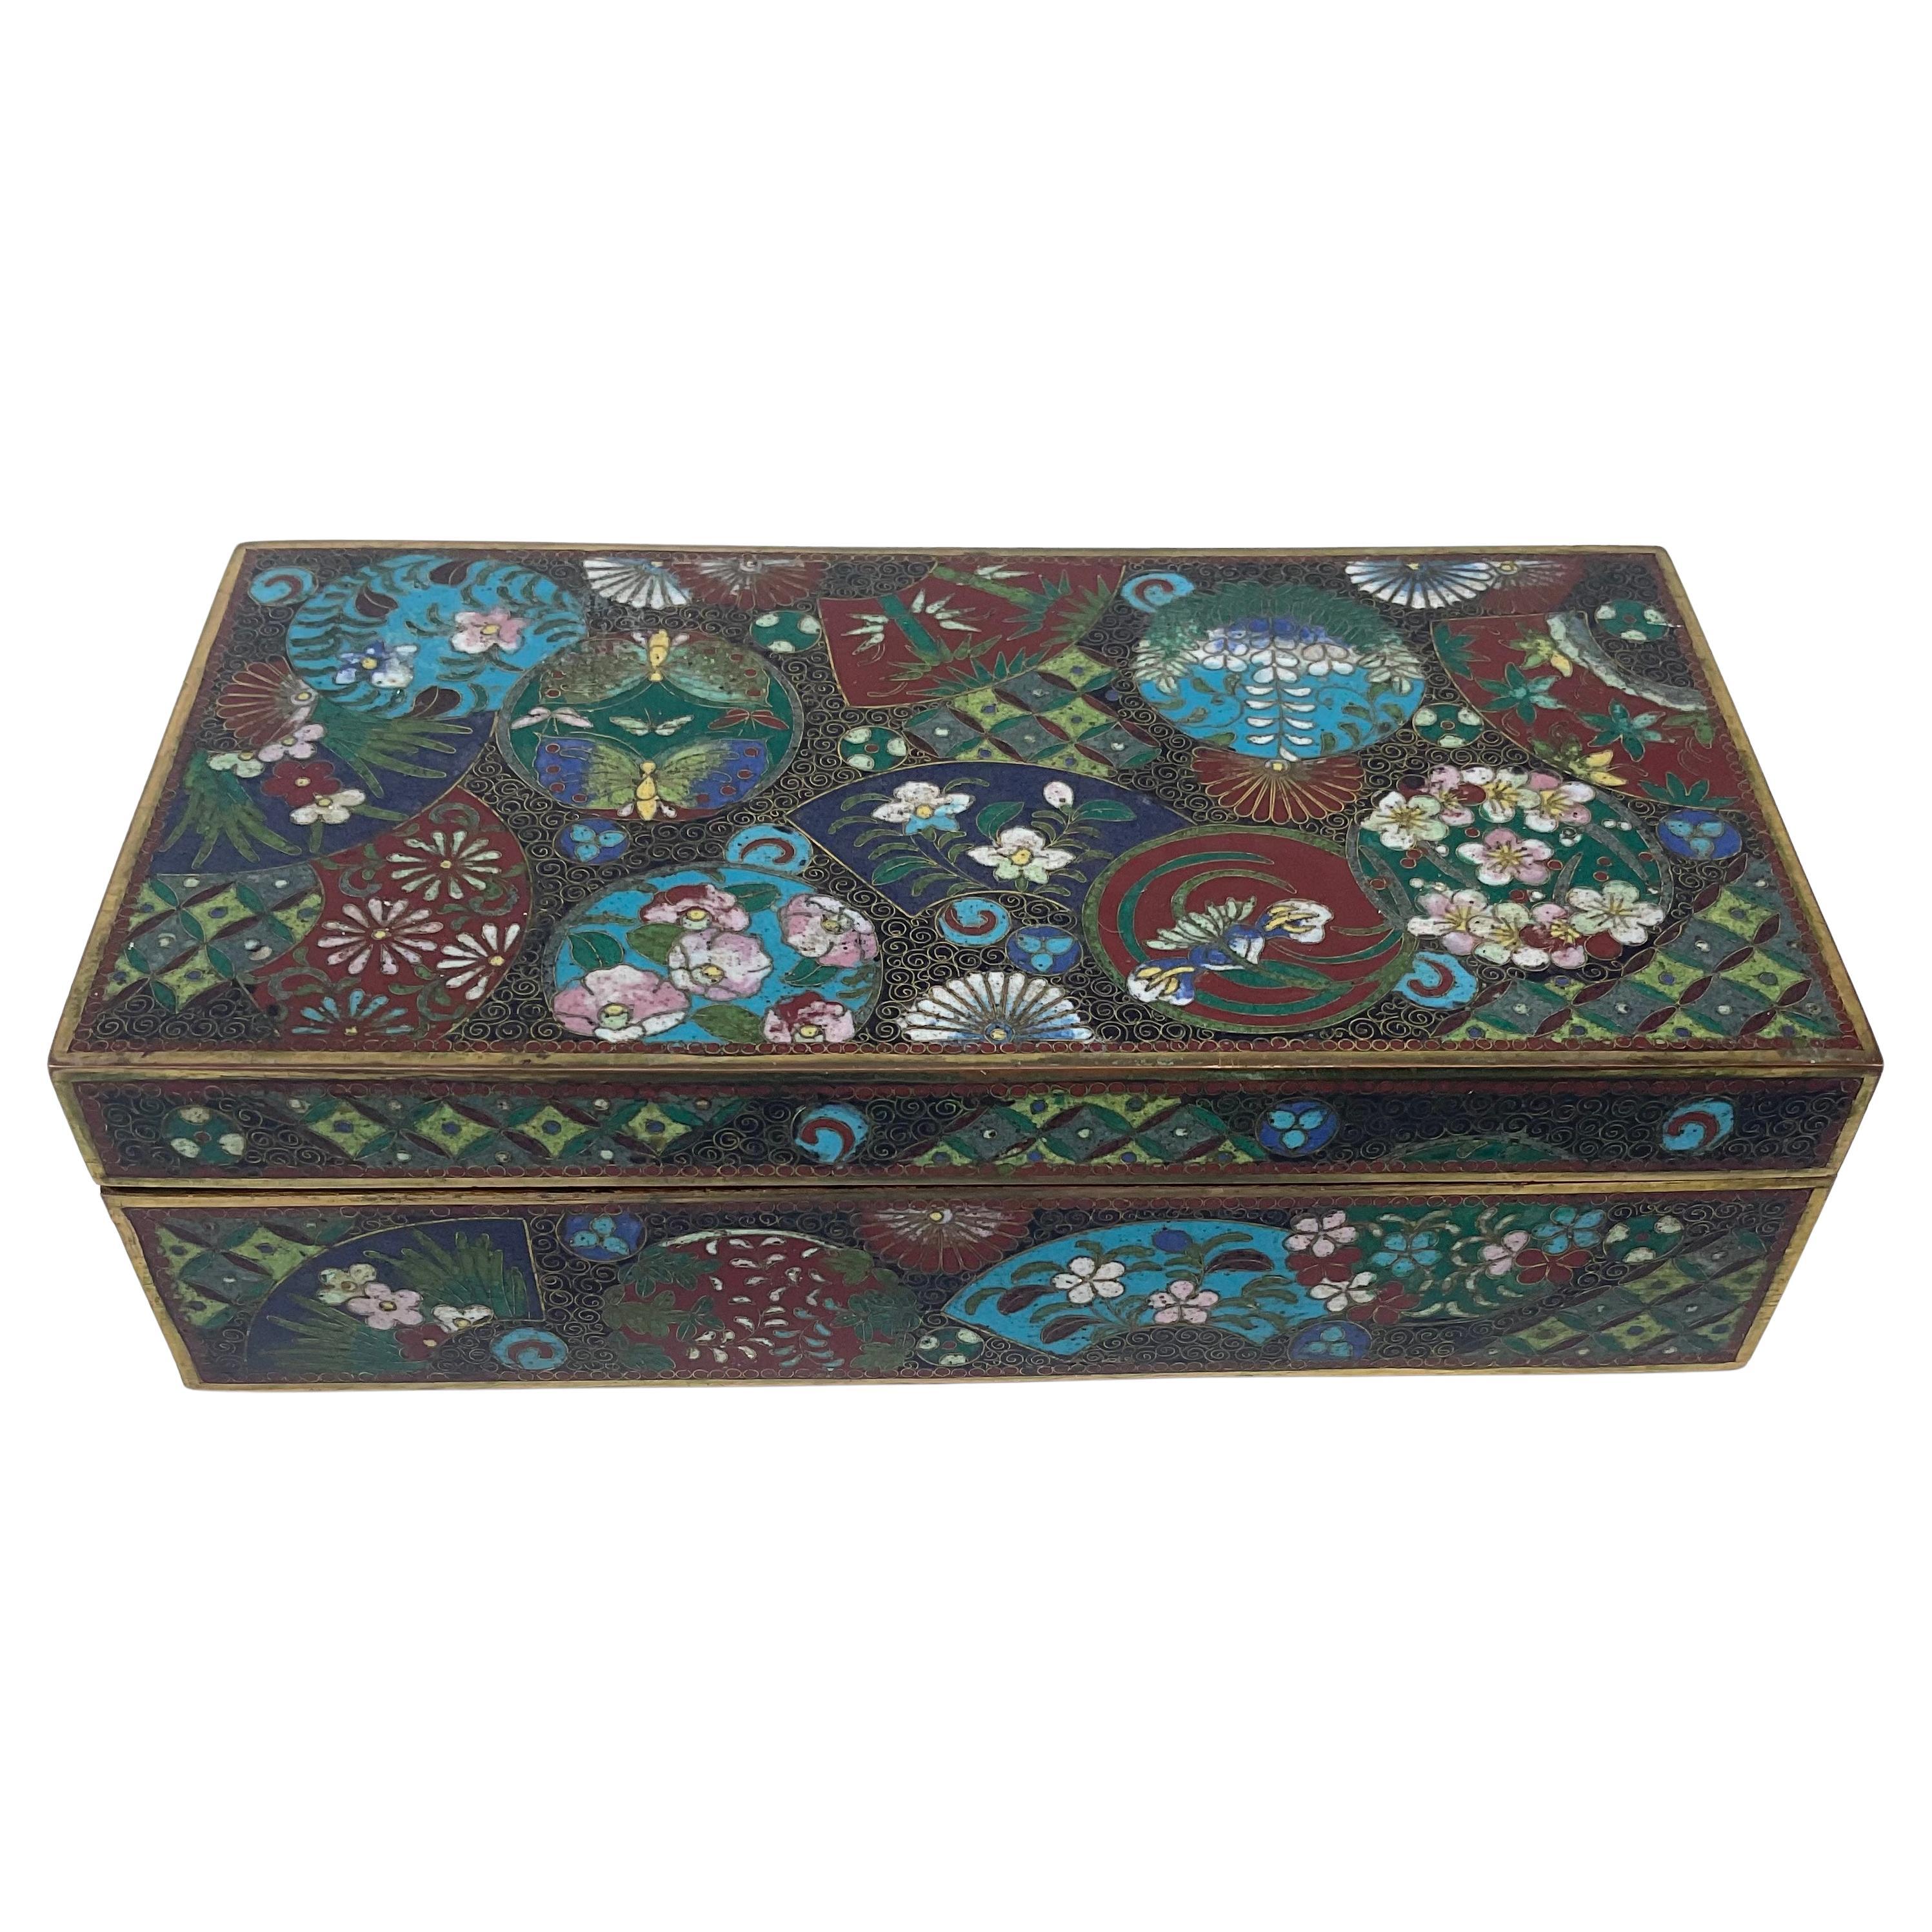 Japanese Cloisonne Detailed Antique decorative box with incredible colors detail and design. Most likely Meiji Era.